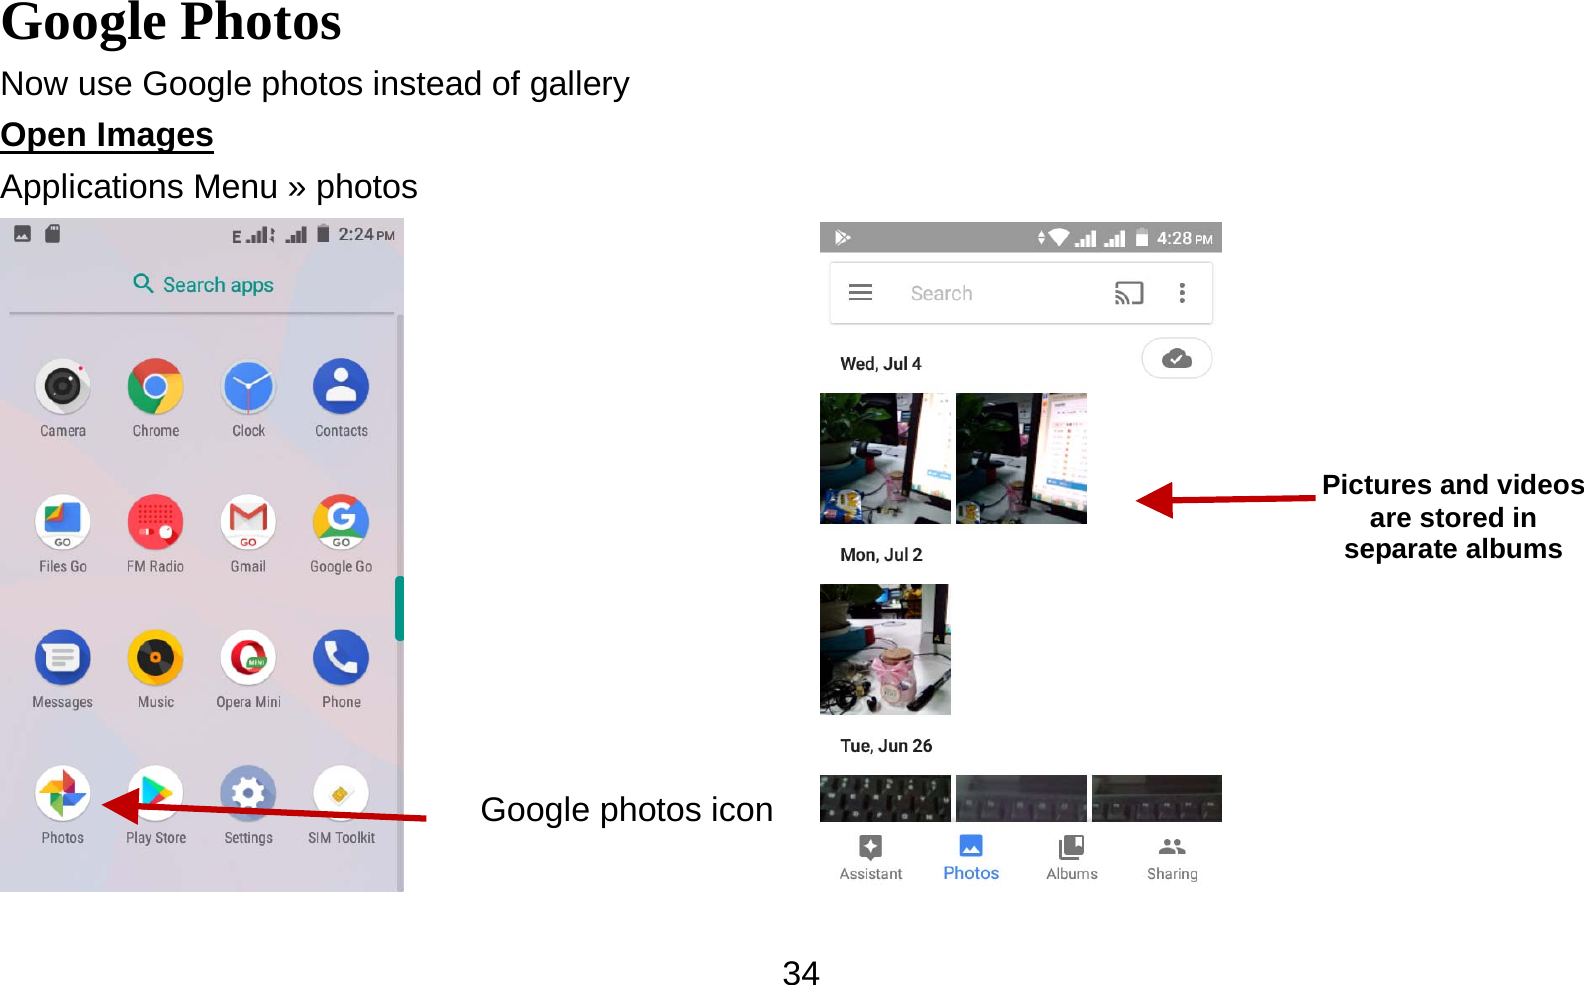   34Google Photos                                        Now use Google photos instead of gallery Open Images                                                                                      Applications Menu » photos                  Pictures and videos are stored in separate albums Google photos icon 